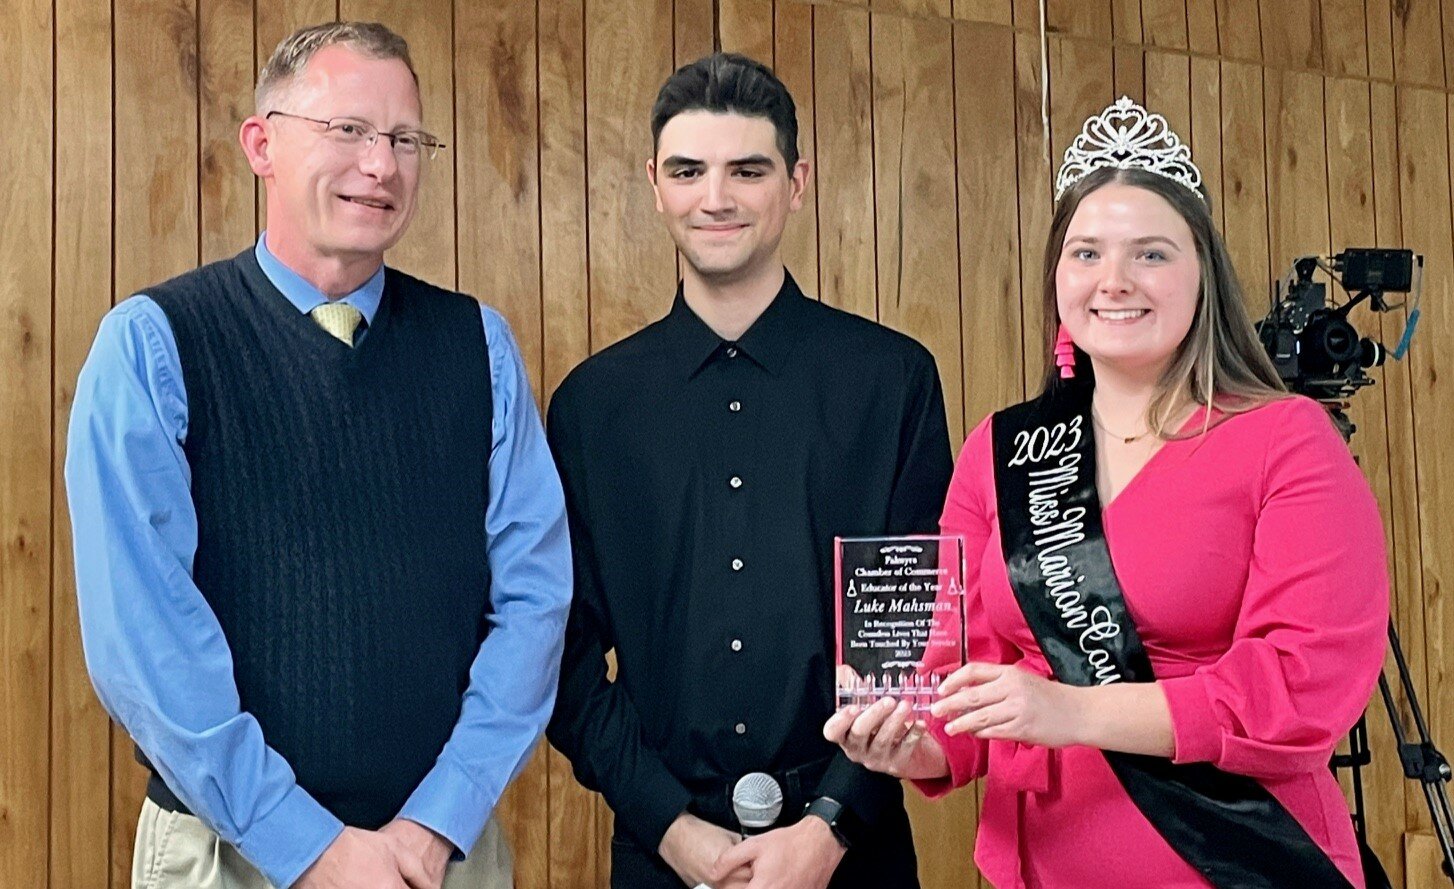 Elina Reed, the 2023 Miss Marion County, presents to Deacon Luke Mahsman, left, the Palmyra Chamber of Commerce’s 2023 Educator of the Year award on Jan. 11. With them is Tim Wellman, a former student of Deacon Mahsman, who introduced him at the award ceremony.